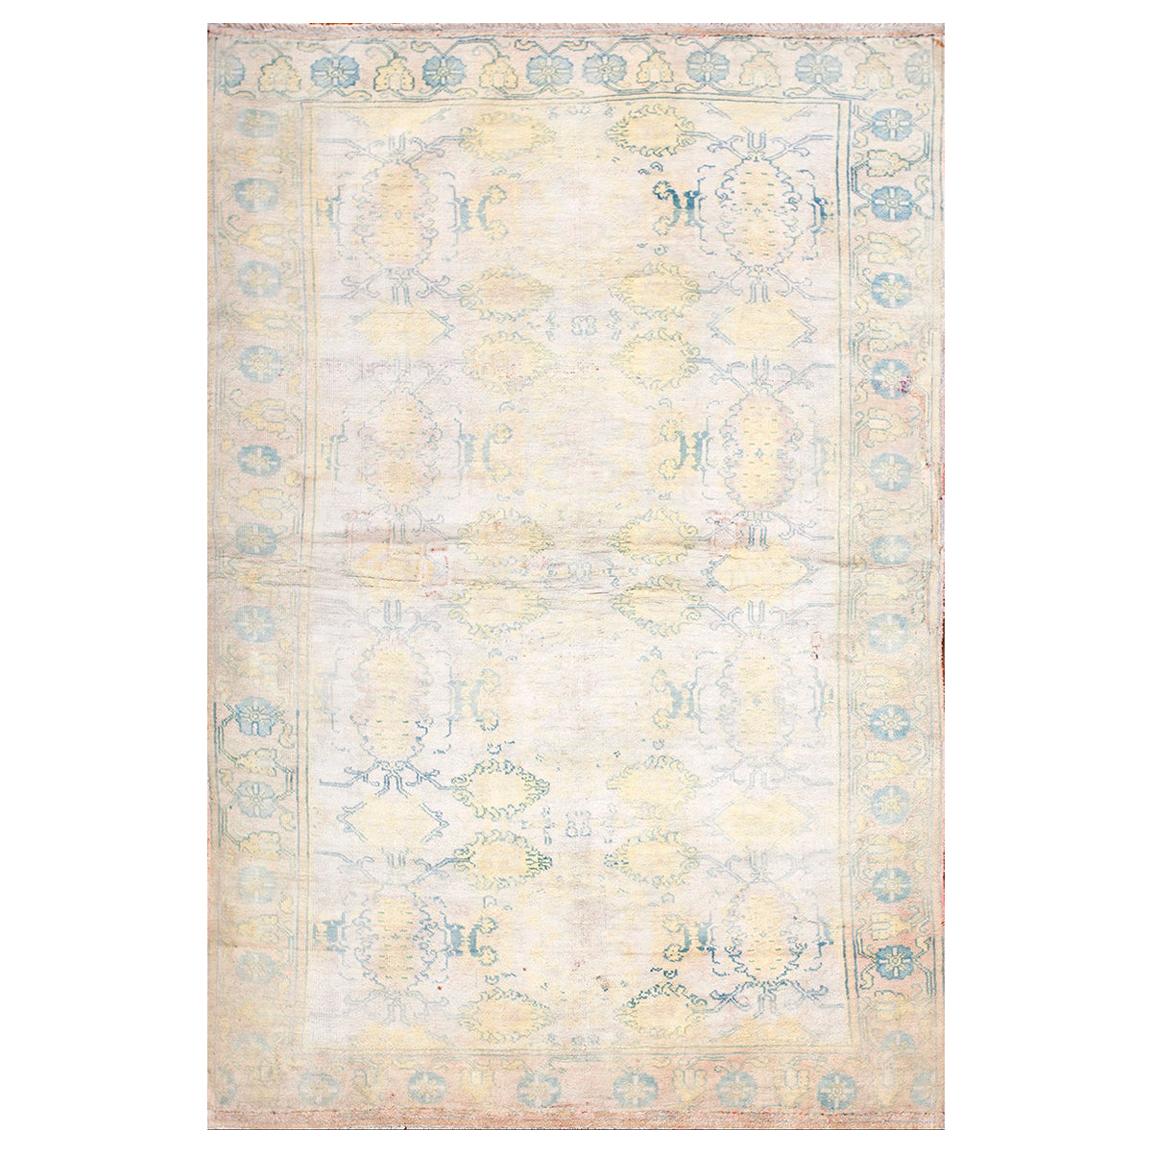 Antique Indian Agra, Cotton Rugs